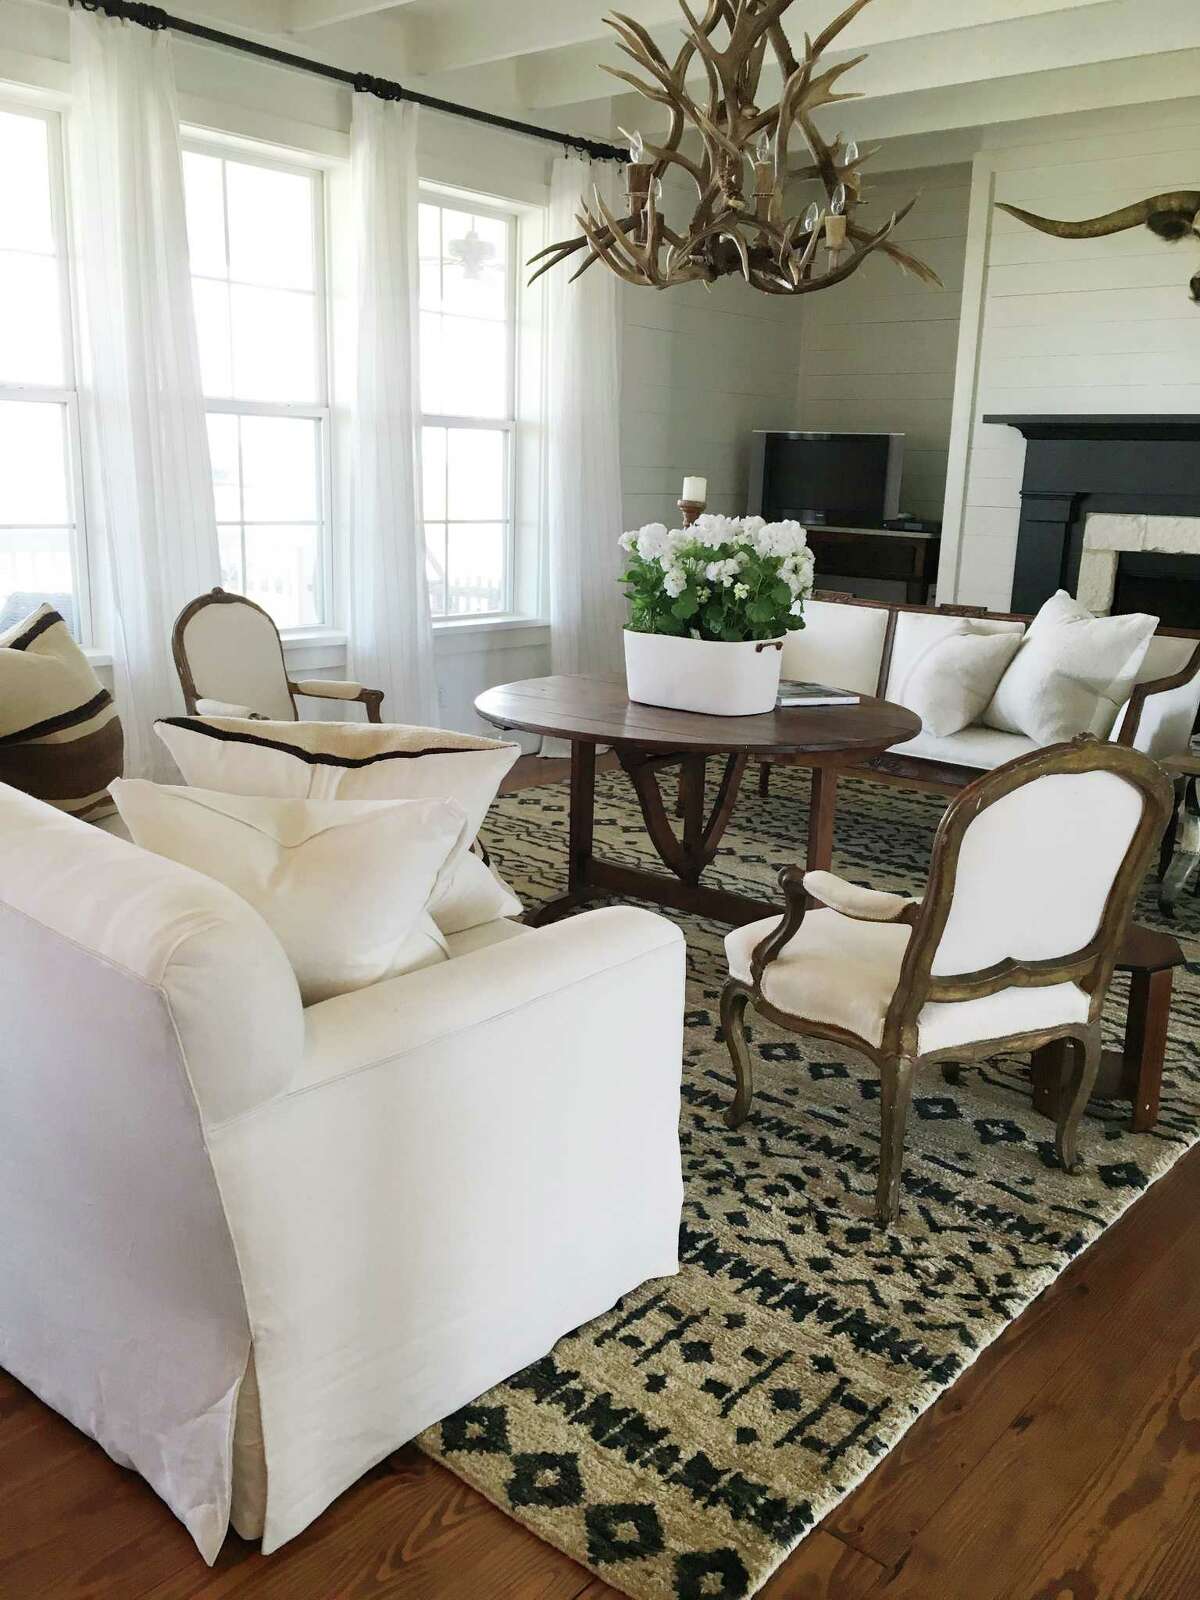 Houstonians Richard and Kimberley Rolland bought their weekend retreat in Carmine fully decorated from their own interior designer, Renea Abbott.